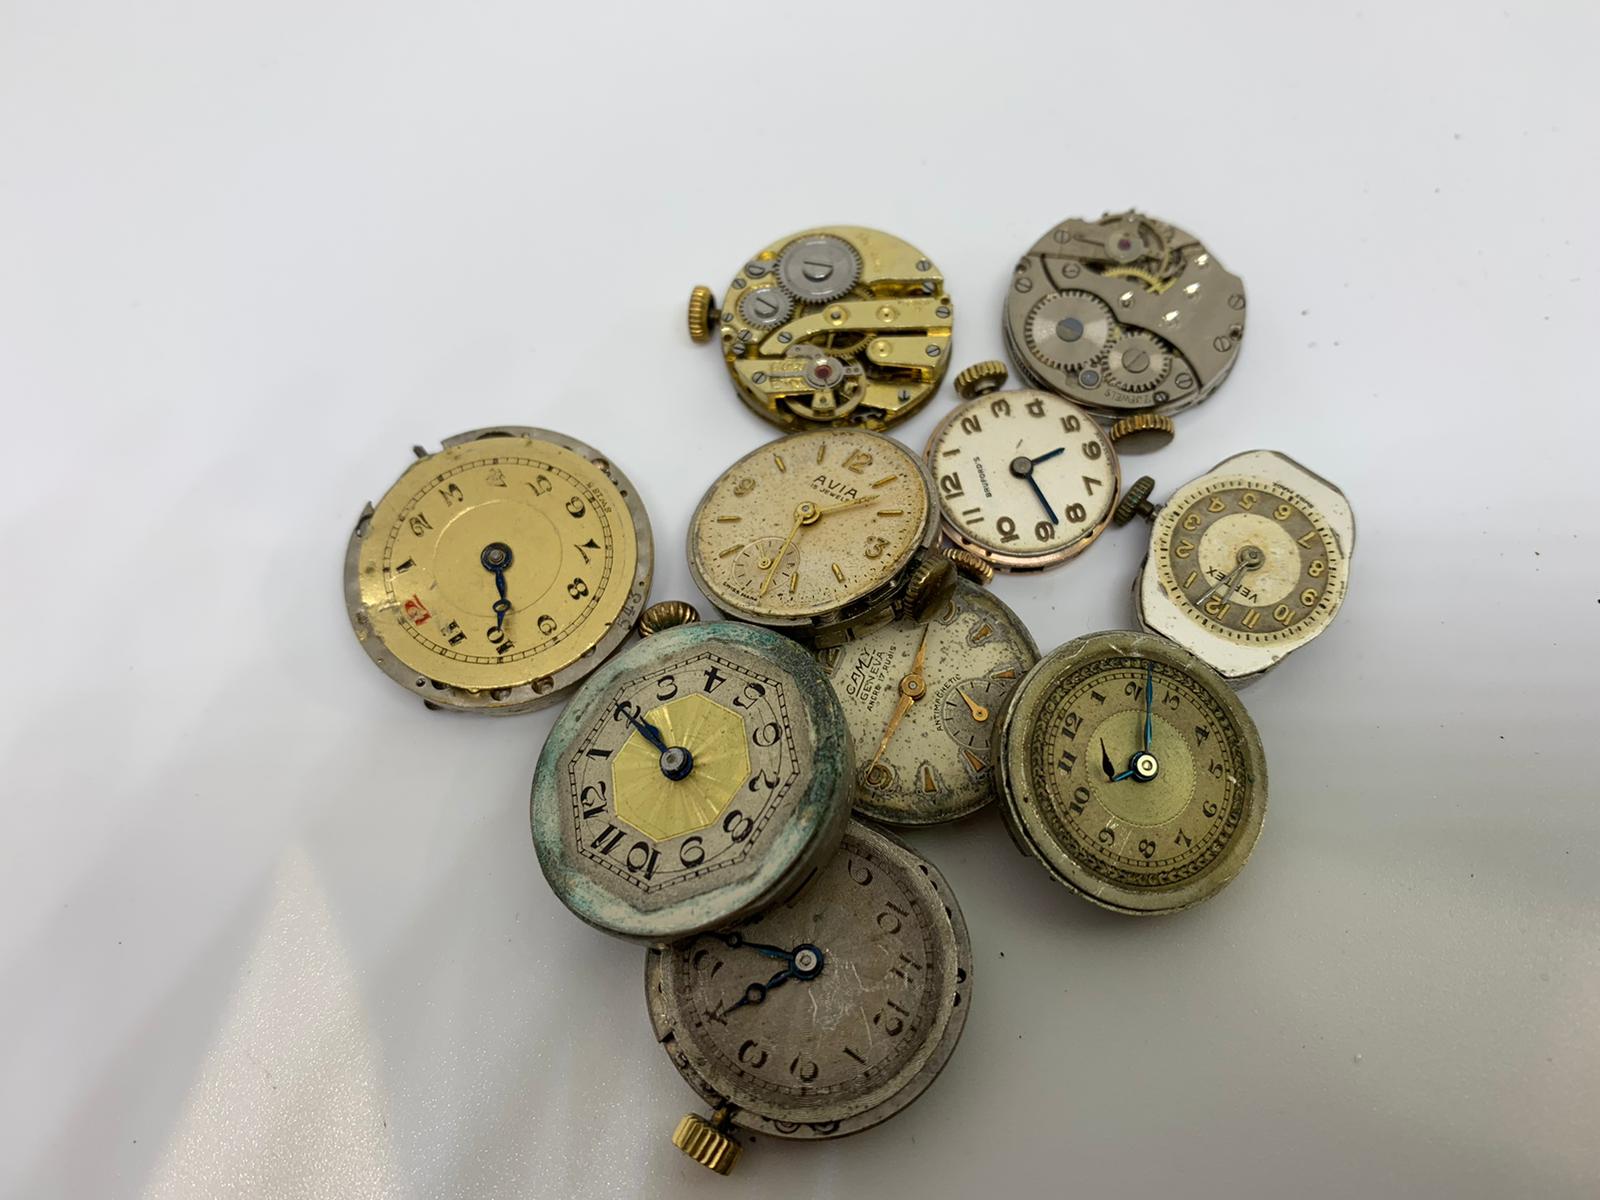 10 assd ladies watch movements - Image 2 of 2